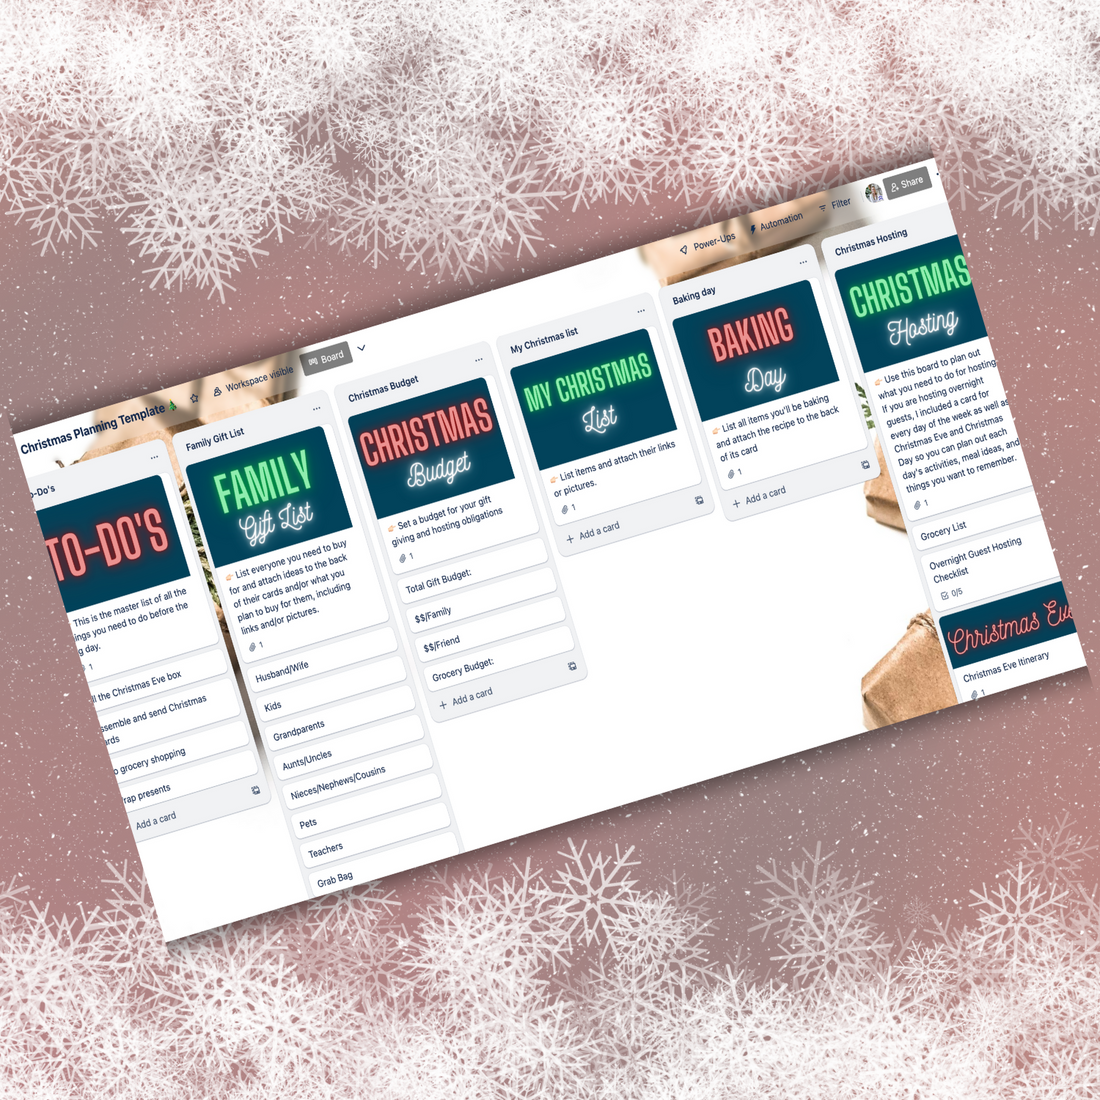 A My Homier Home Christmas Planning Trello Template for holiday preparation, featuring a festive page with snowflakes.